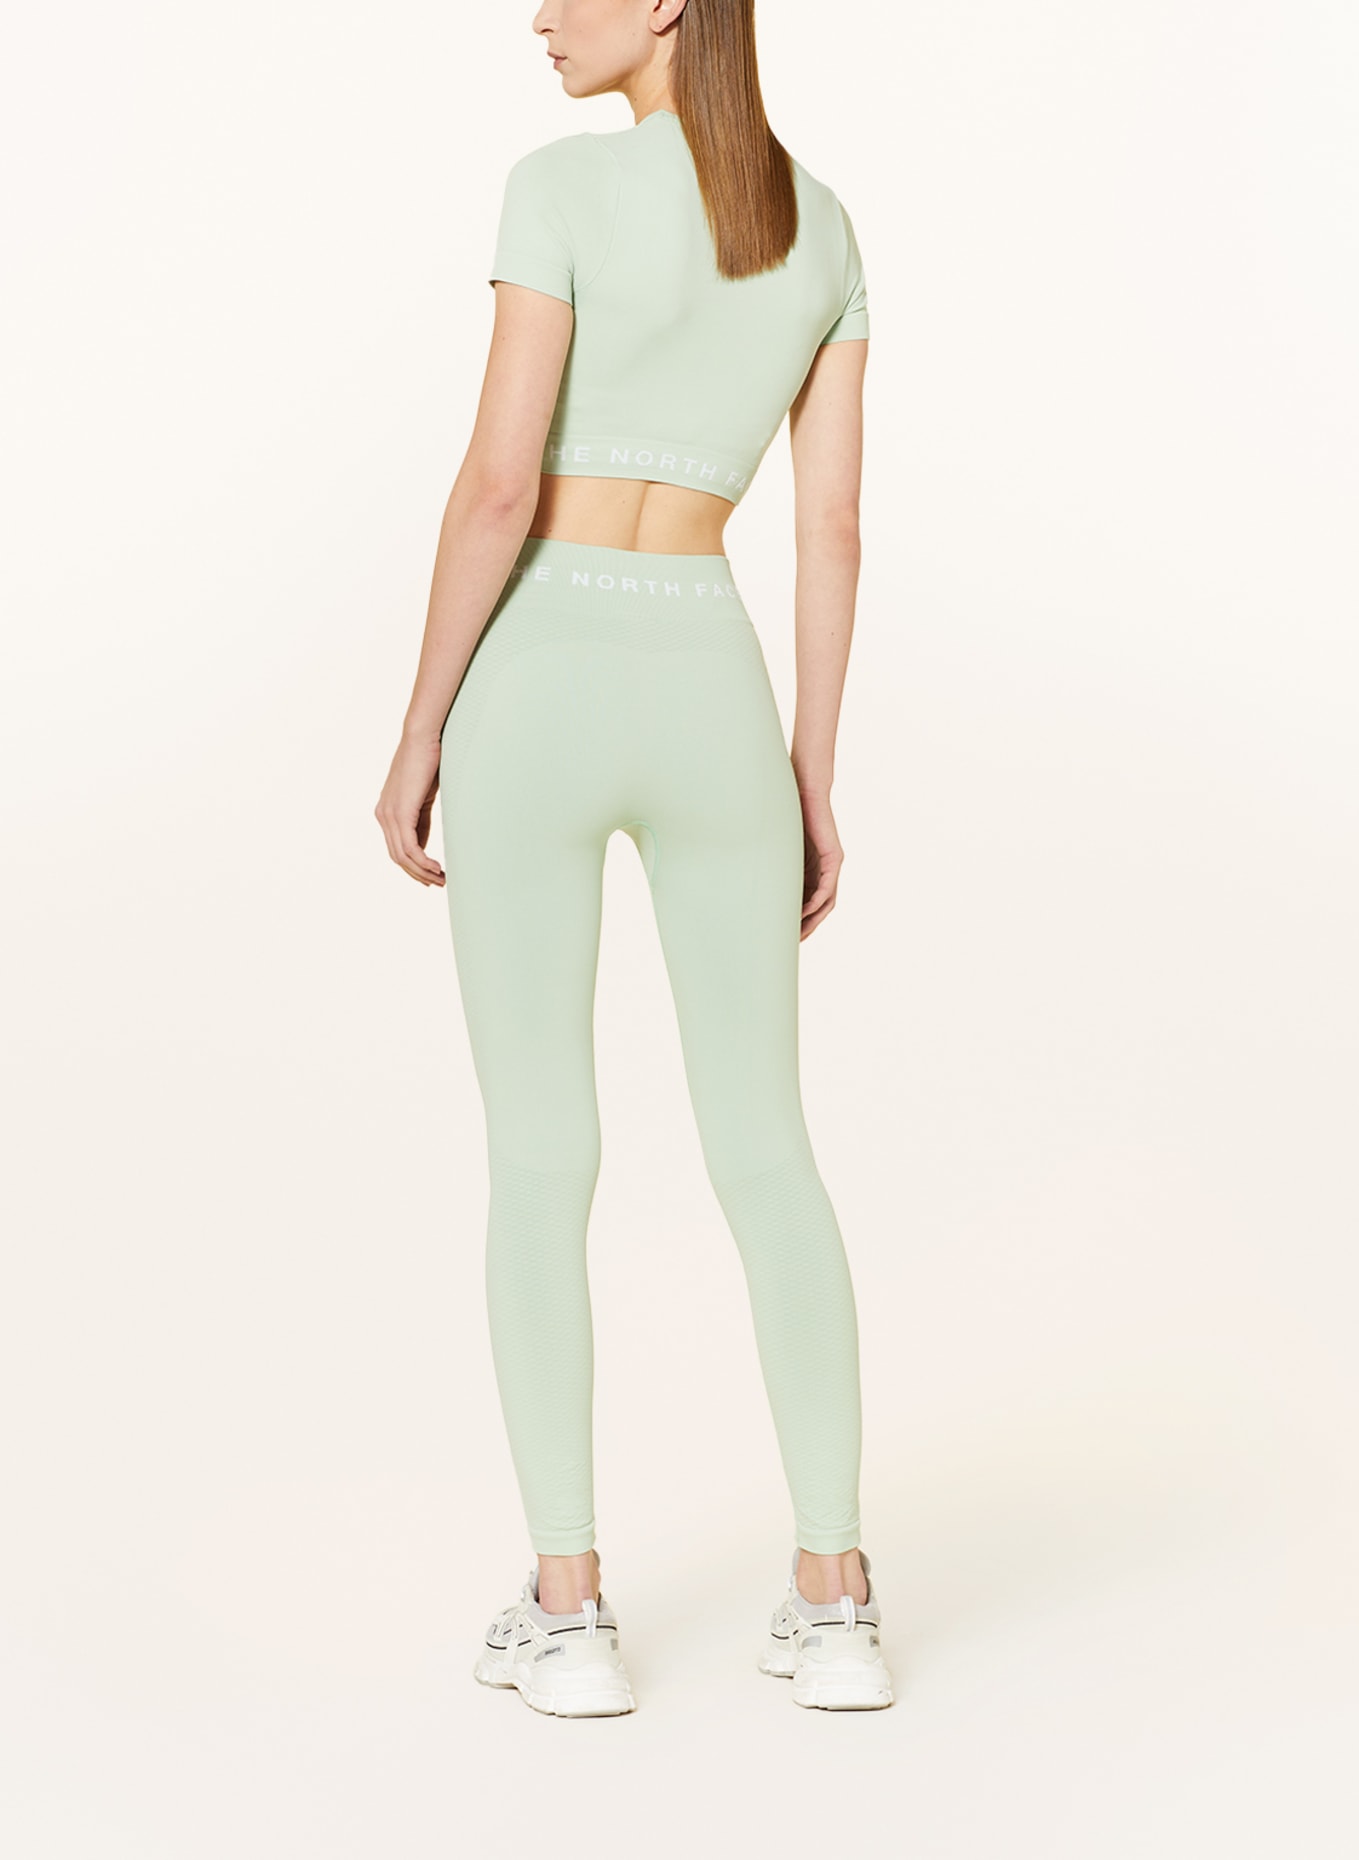 THE NORTH FACE Tights, Color: MINT (Image 3)